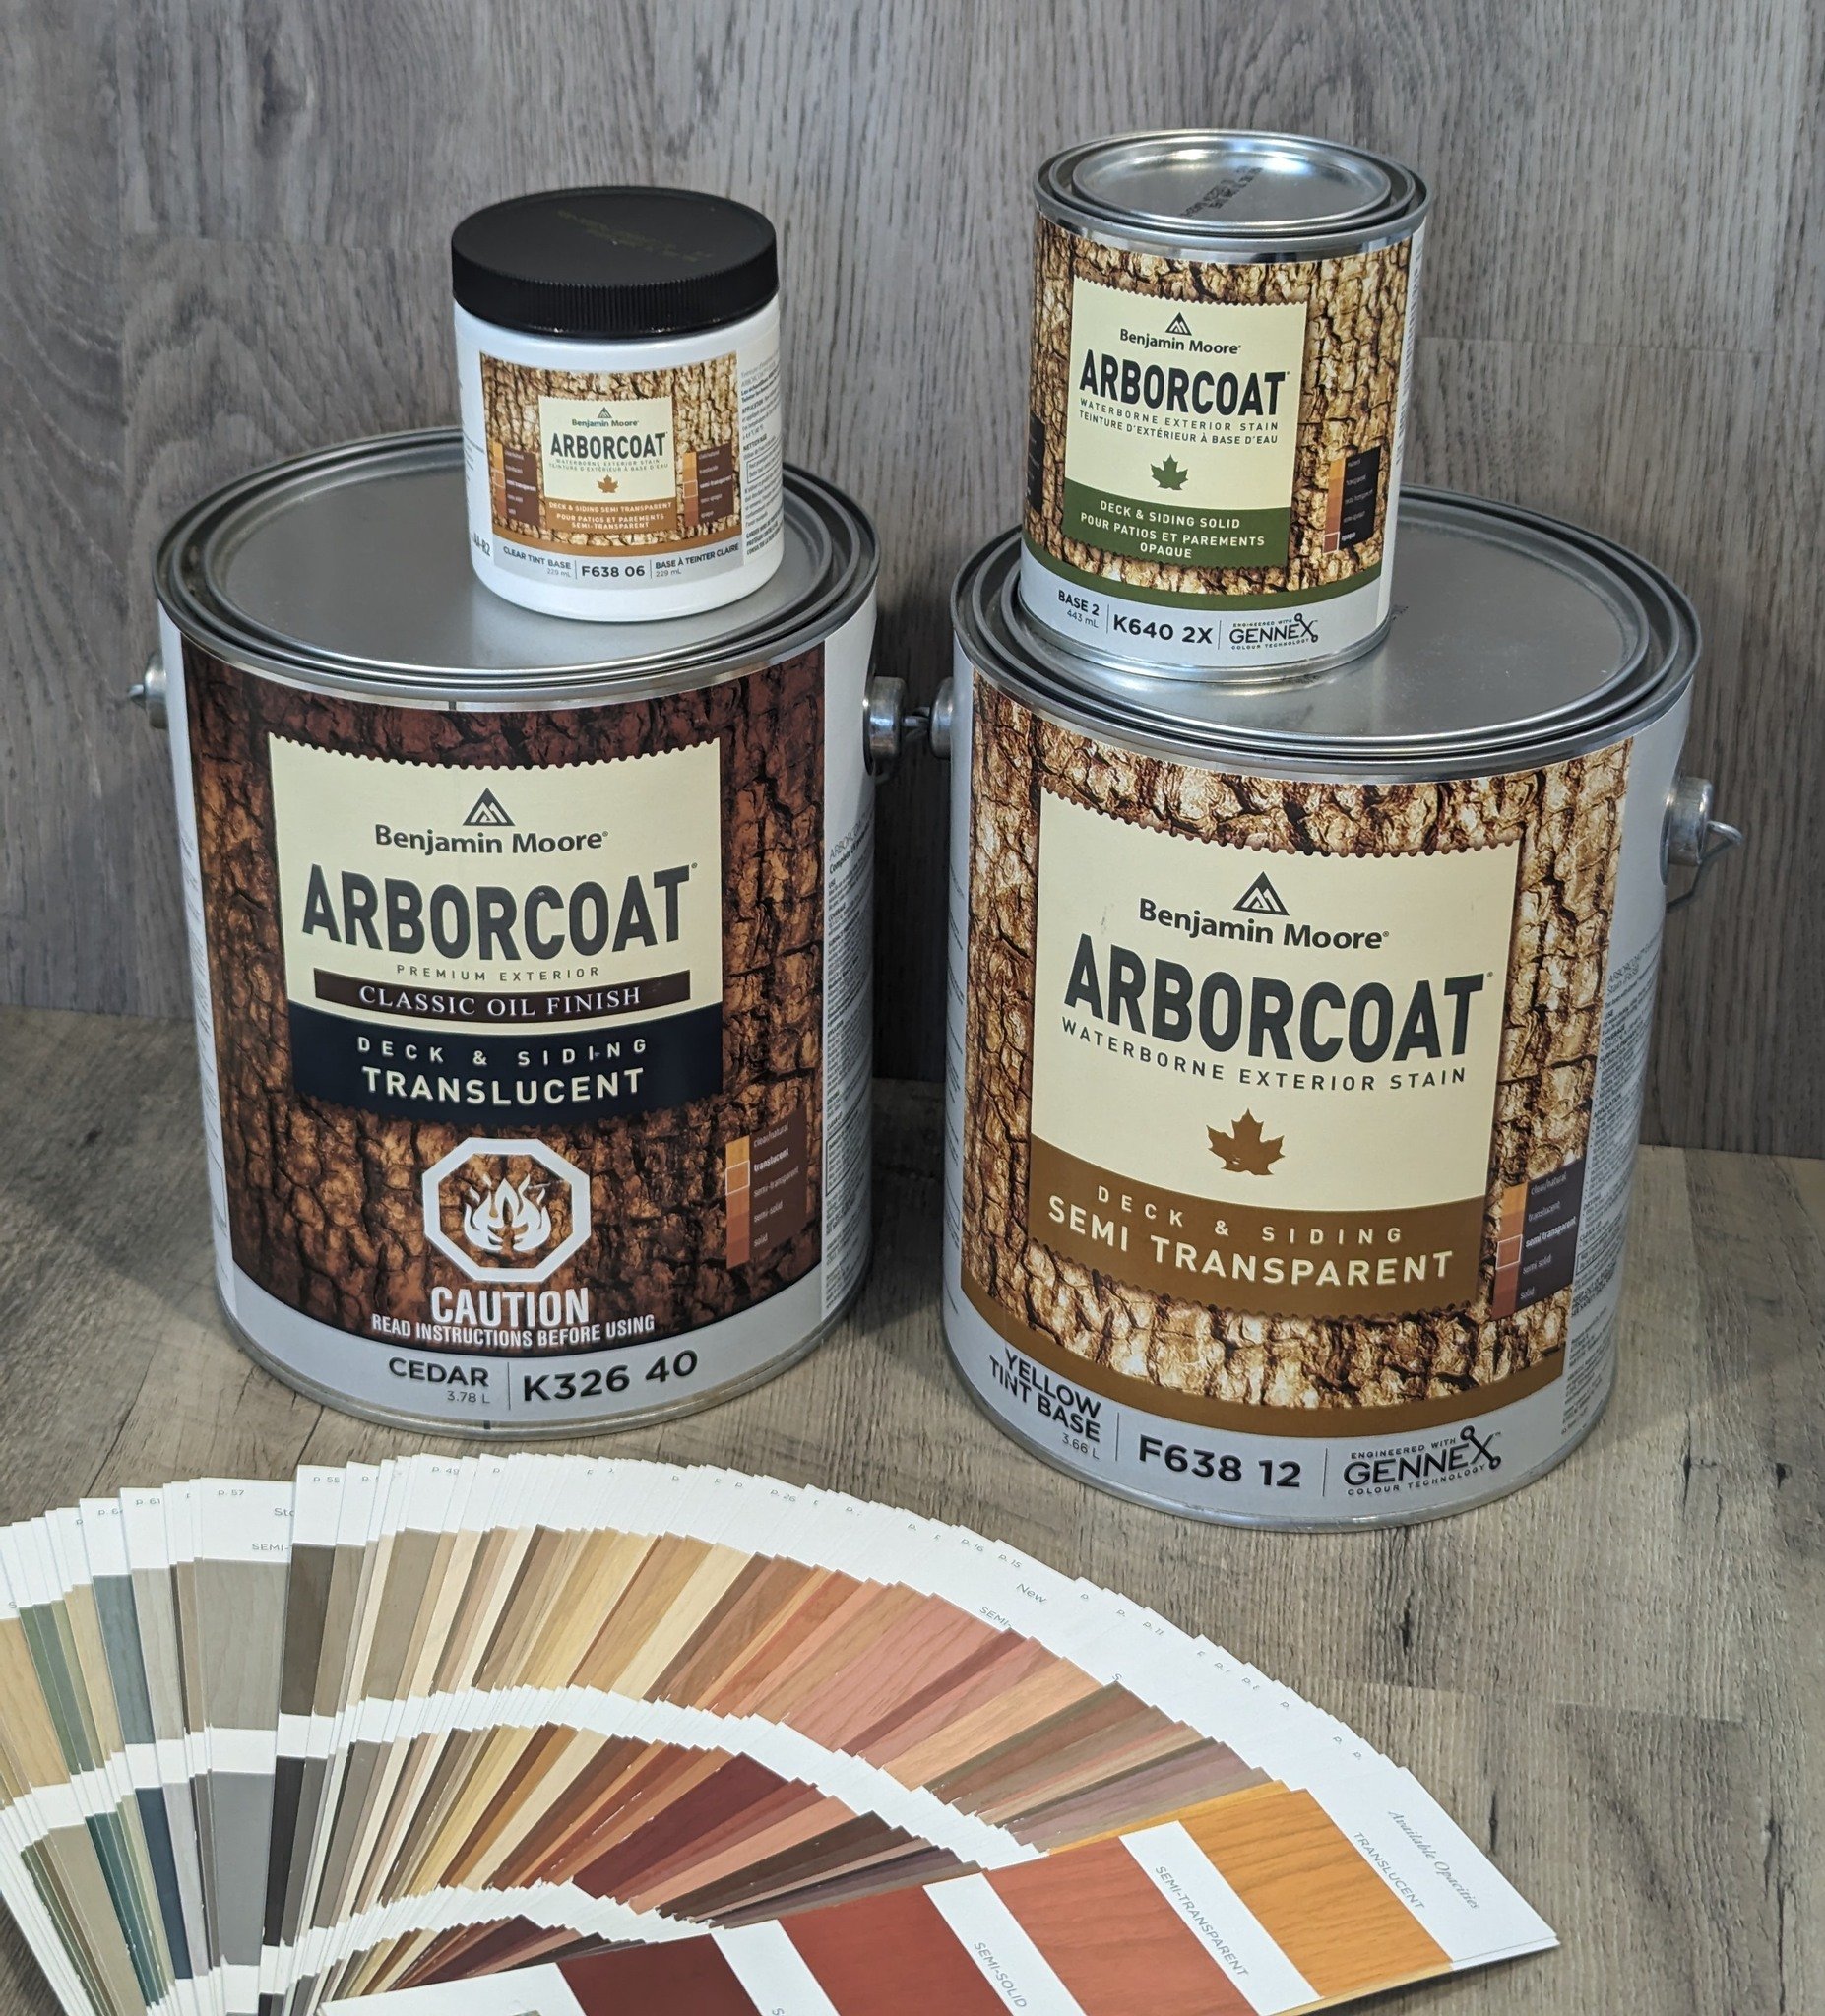 This just in! 30% Off all remaining stock of Arborcoat products at Oakville Paint &amp; Decor Centre while quantities last! Arborcoat is a premium quality wood stain, formulated to protect wood, resist abrasion and beautify wood decking, siding, fenc